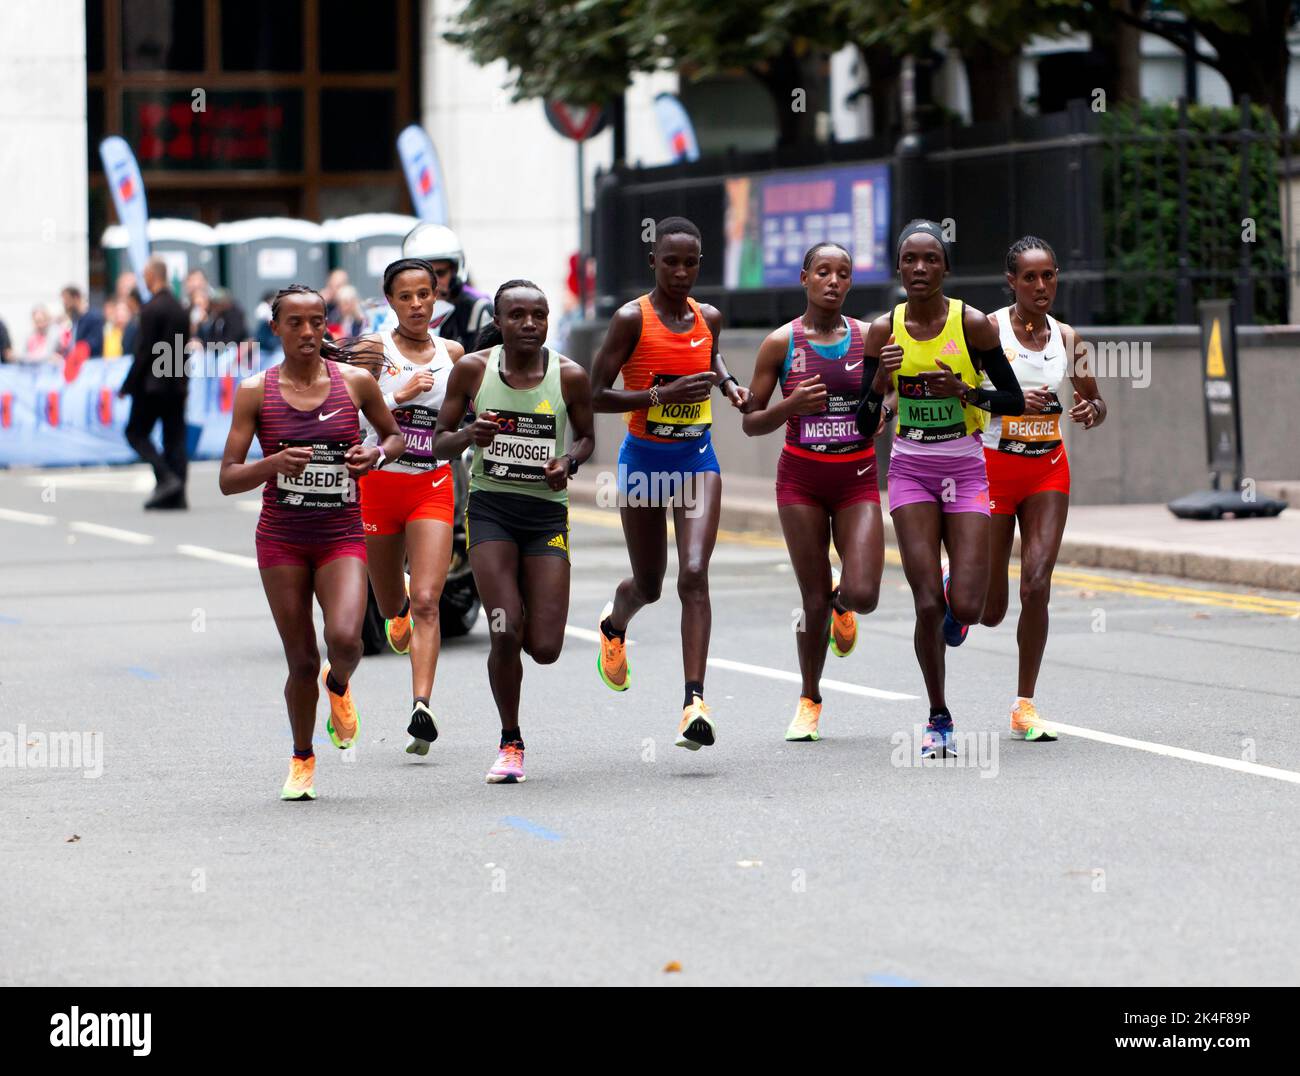 London, 2nd October 2022, Womens Elite Runners, including  Sutume Kebede, Joyciline Jepkosgei, Joan Melly, Yalemzerf Yehualaw,  Judith Korir, Alemu Megertu and  Ashete Bekere,  pass through Cabot Square, during the 2022 London Marathon.  Yalemzerf Yehualaw went on to win the event in a time of 2:17:26; Credit John Gaffen/Alamy Live News Stock Photo